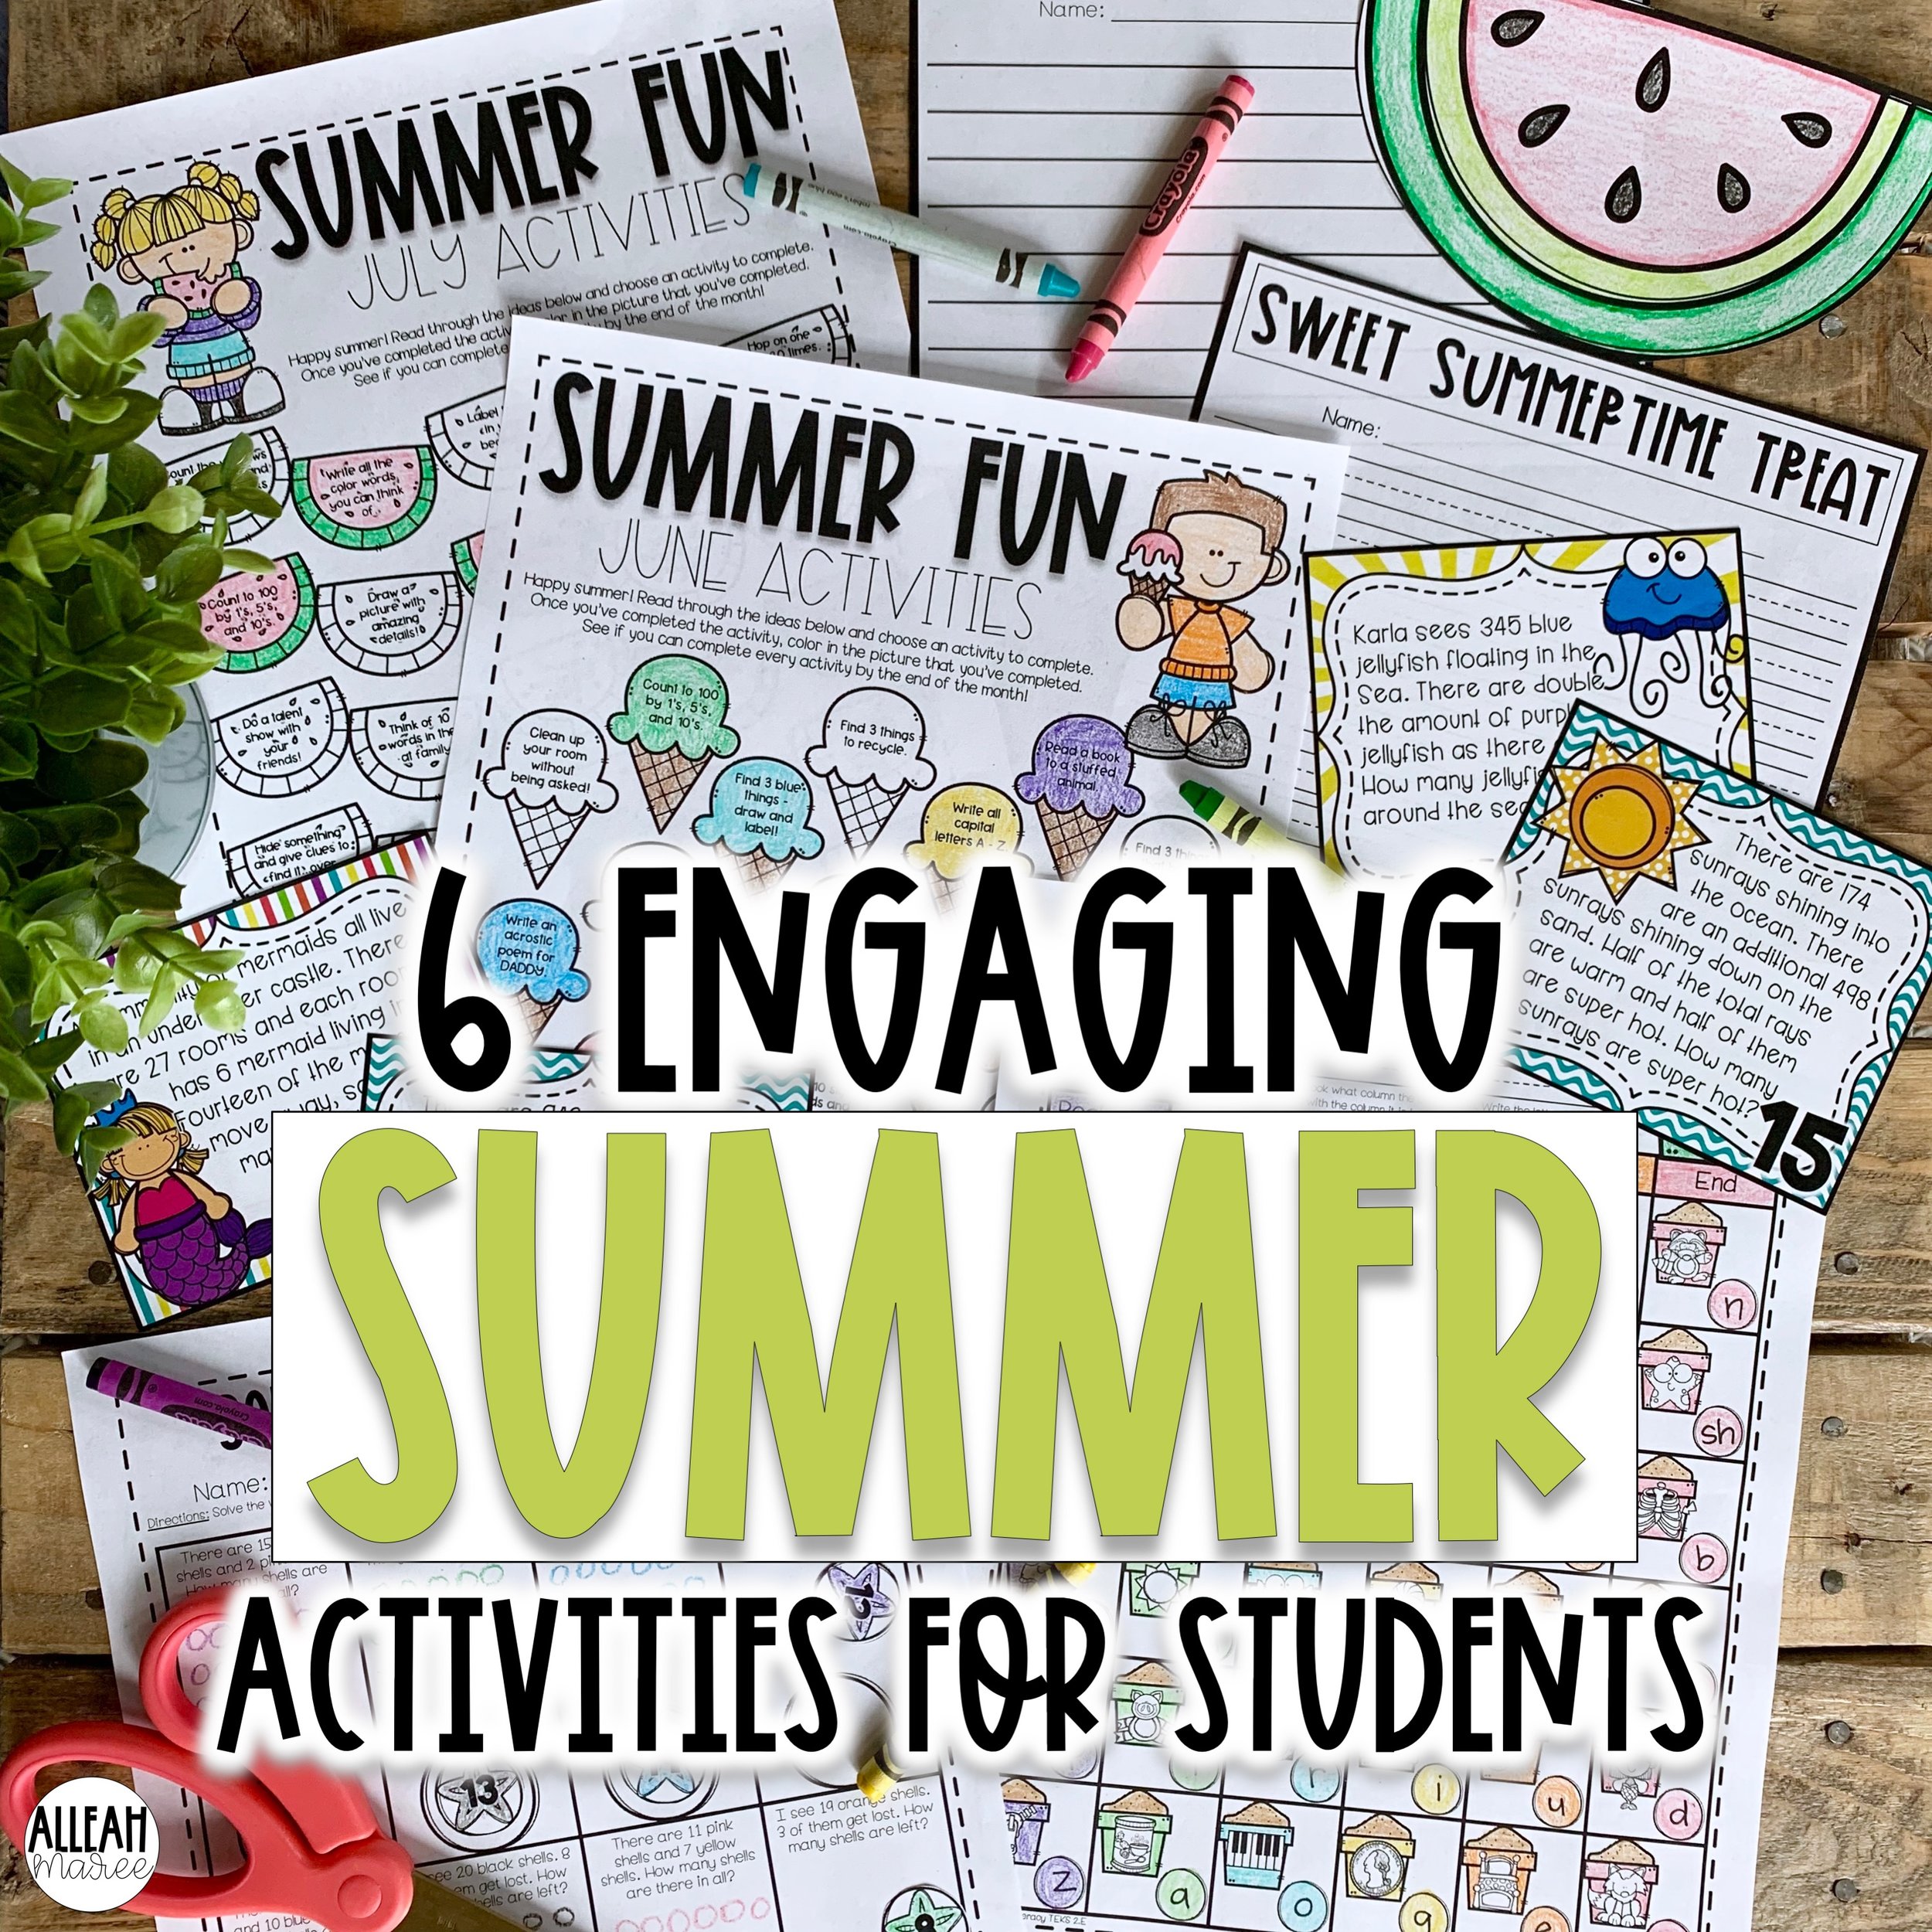 The Unlikely Homeschool: 6 Simple Summertime Art Projects for Kids